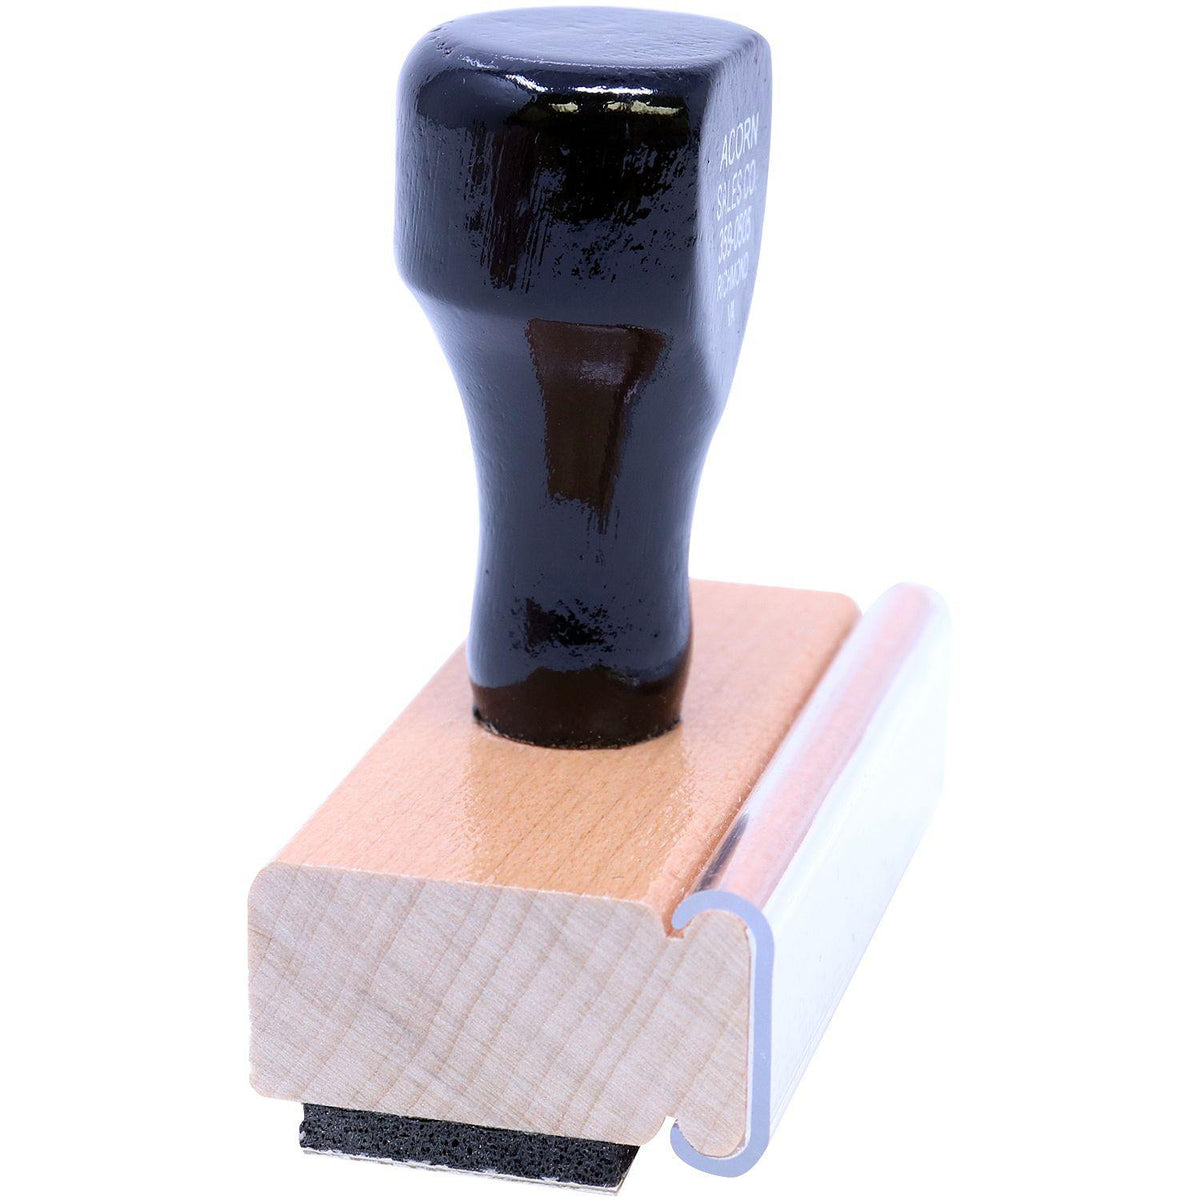 Large What Happened Rubber Stamp - Engineer Seal Stamps - Brand_Acorn, Impression Size_Large, Stamp Type_Regular Stamp, Type of Use_Teacher